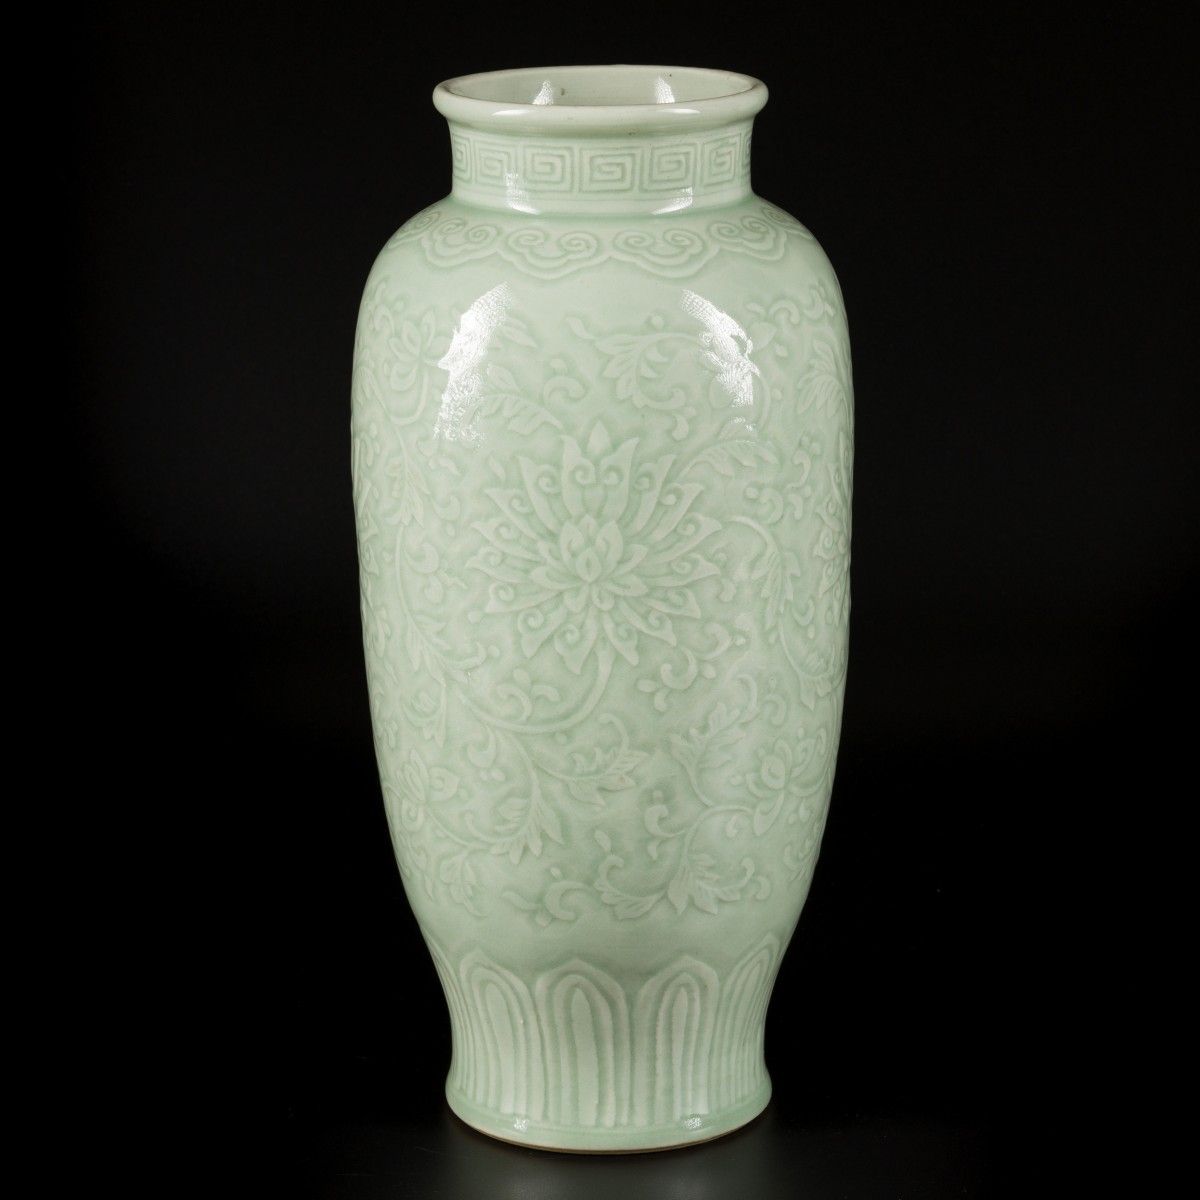 A porcelain celadon vase with floral decoration, China, 19th century. H.38厘米。估计：&hellip;